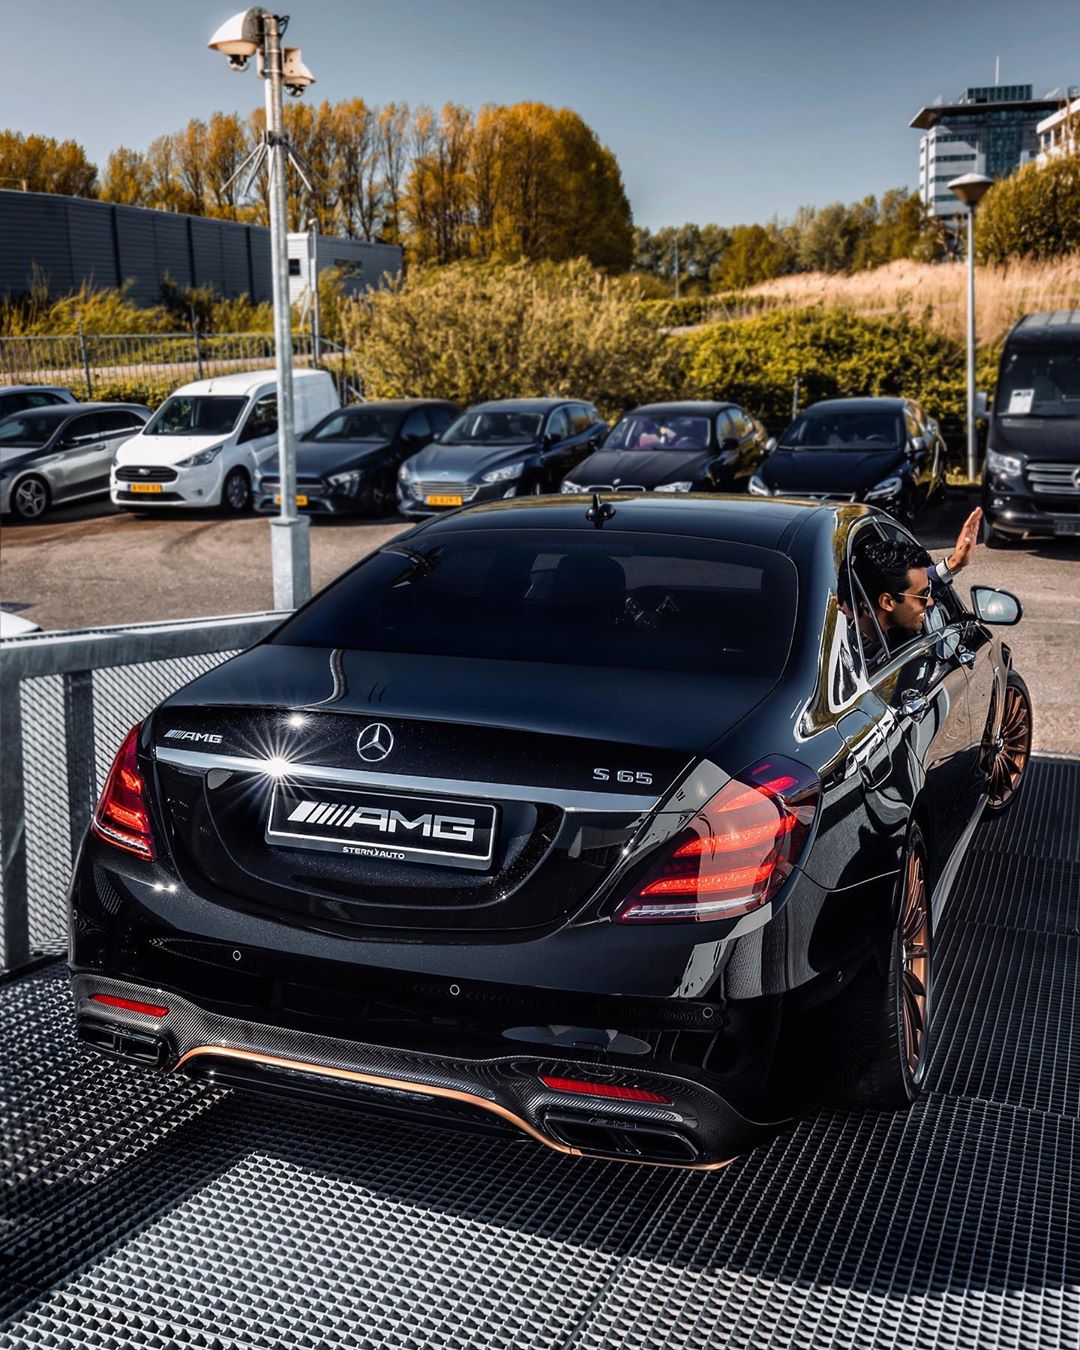 Mercedes-Benz Maybach Fans on Twitter: "2020 S 65 AMG Final Edition V12  BITURBO 🍑 📸: @carvlogger #s65 #s65amg #s65finaledition  https://t.co/o03COqSYZG" / Twitter